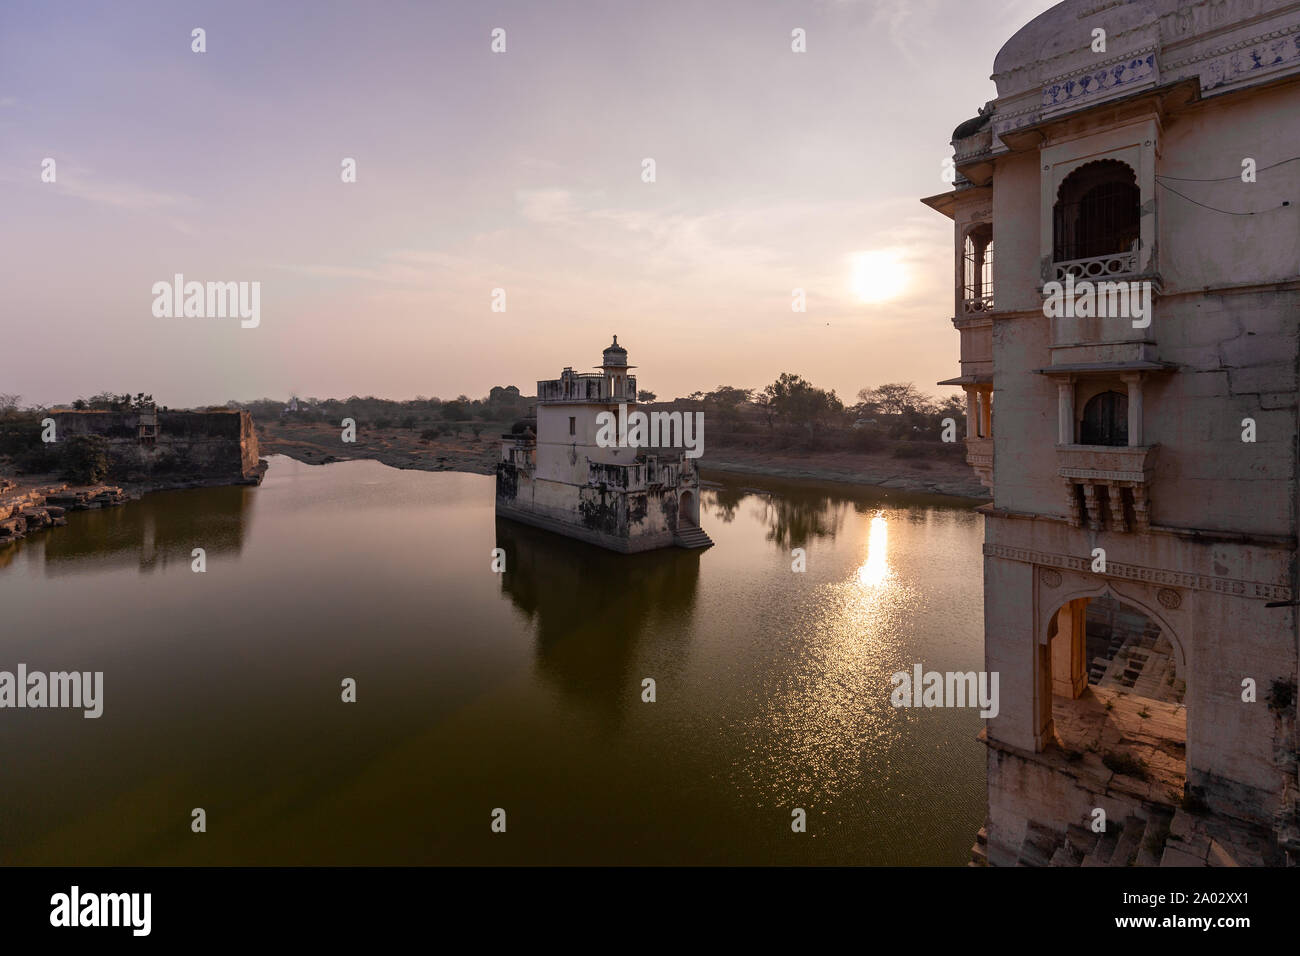 View over a lake in Chittorgarh Fort, Rajasthan, India Stock Photo